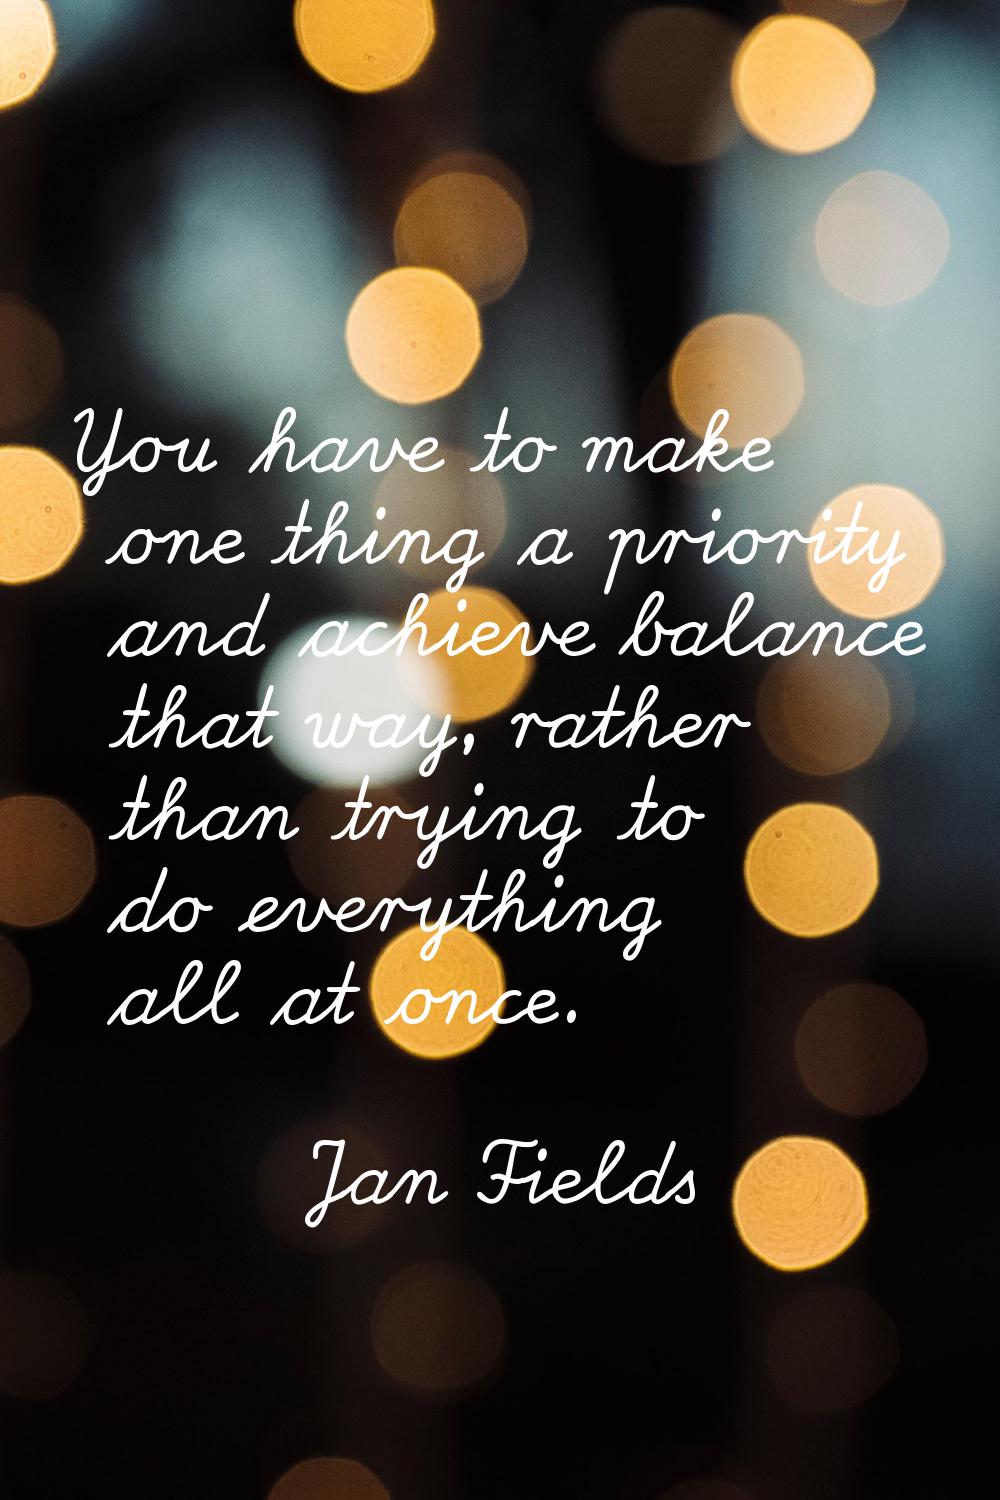 You have to make one thing a priority and achieve balance that way, rather than trying to do everyt